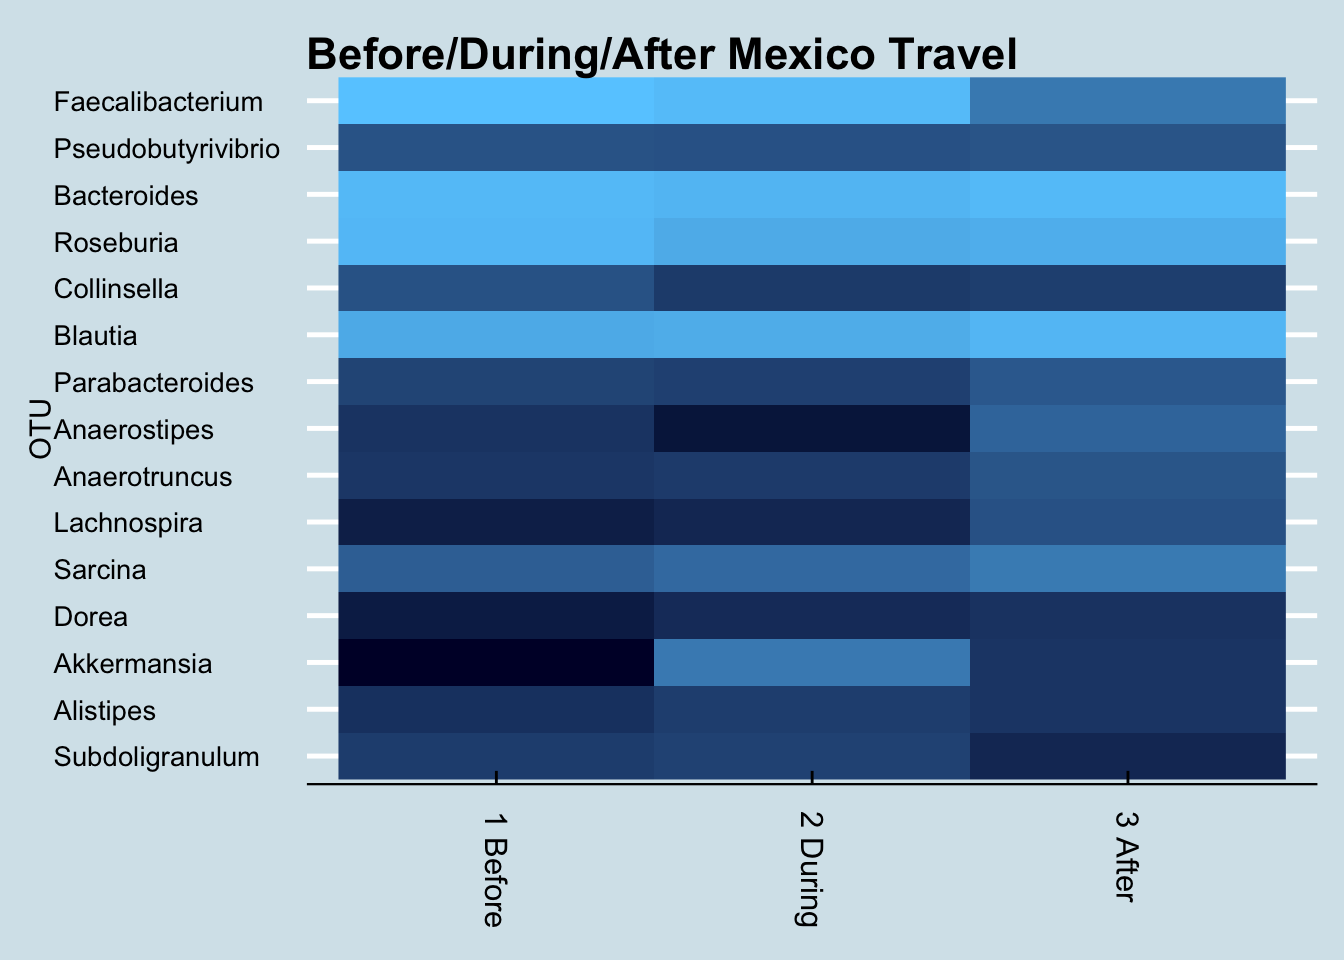 Changes in key genus abundance when traveling to Mexico. (Lighter shades are more abundant)